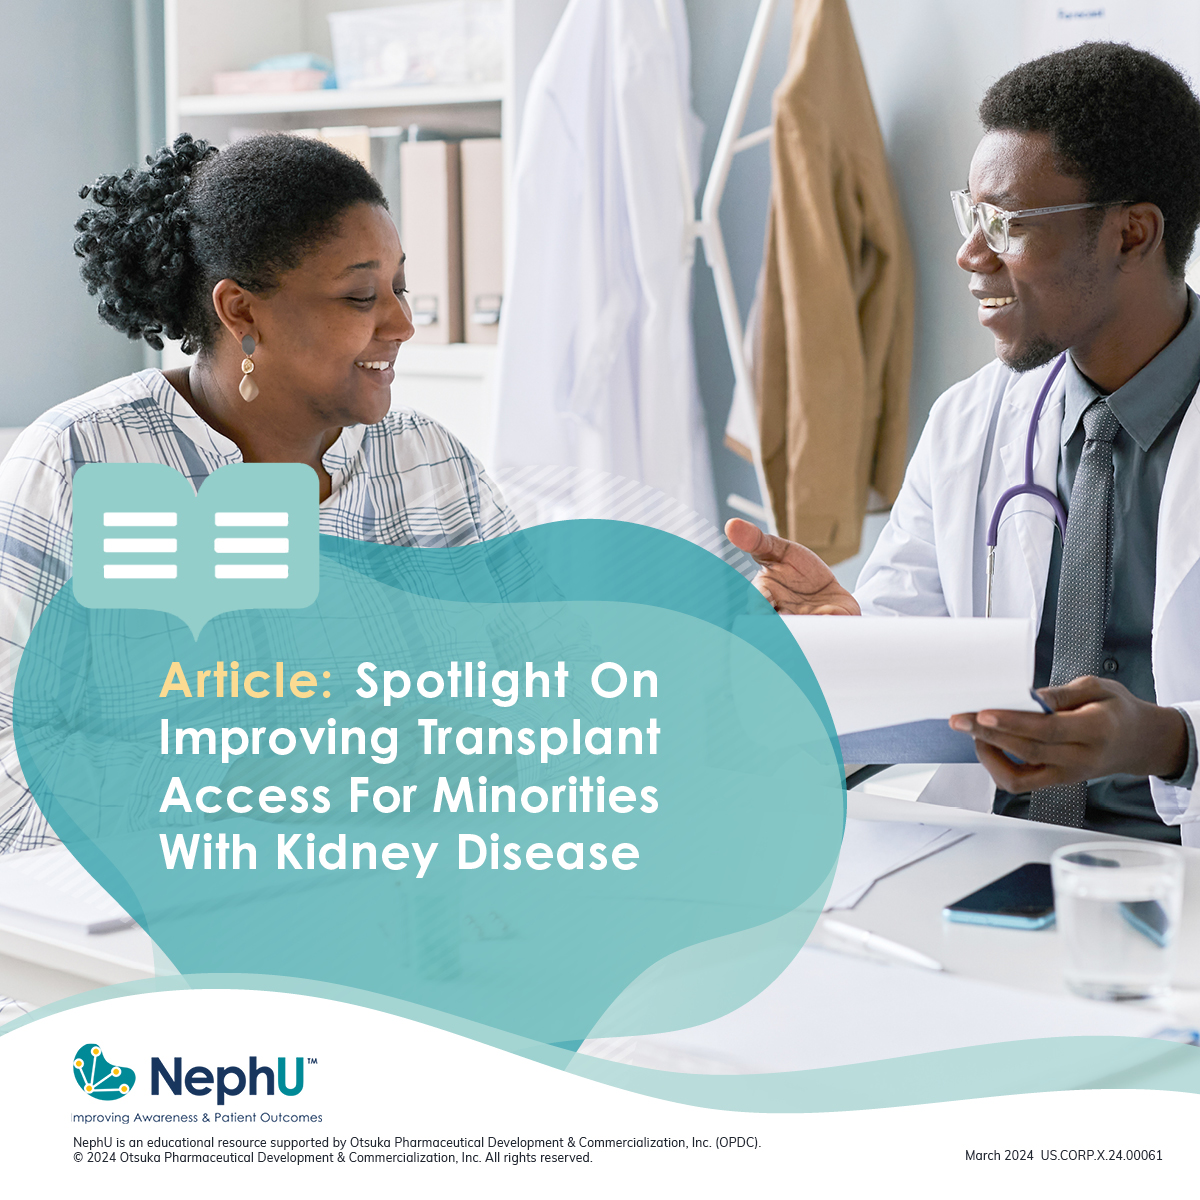 Did you know that Black Americans have a 4X higher rate of developing kidney failure while being less likely to receive a transplant? Learn more in our article. Read it now! go.nephu.org/M0jo #KidneyTransplant #KidneyHealth #MinorityKidneyPatients #NephU